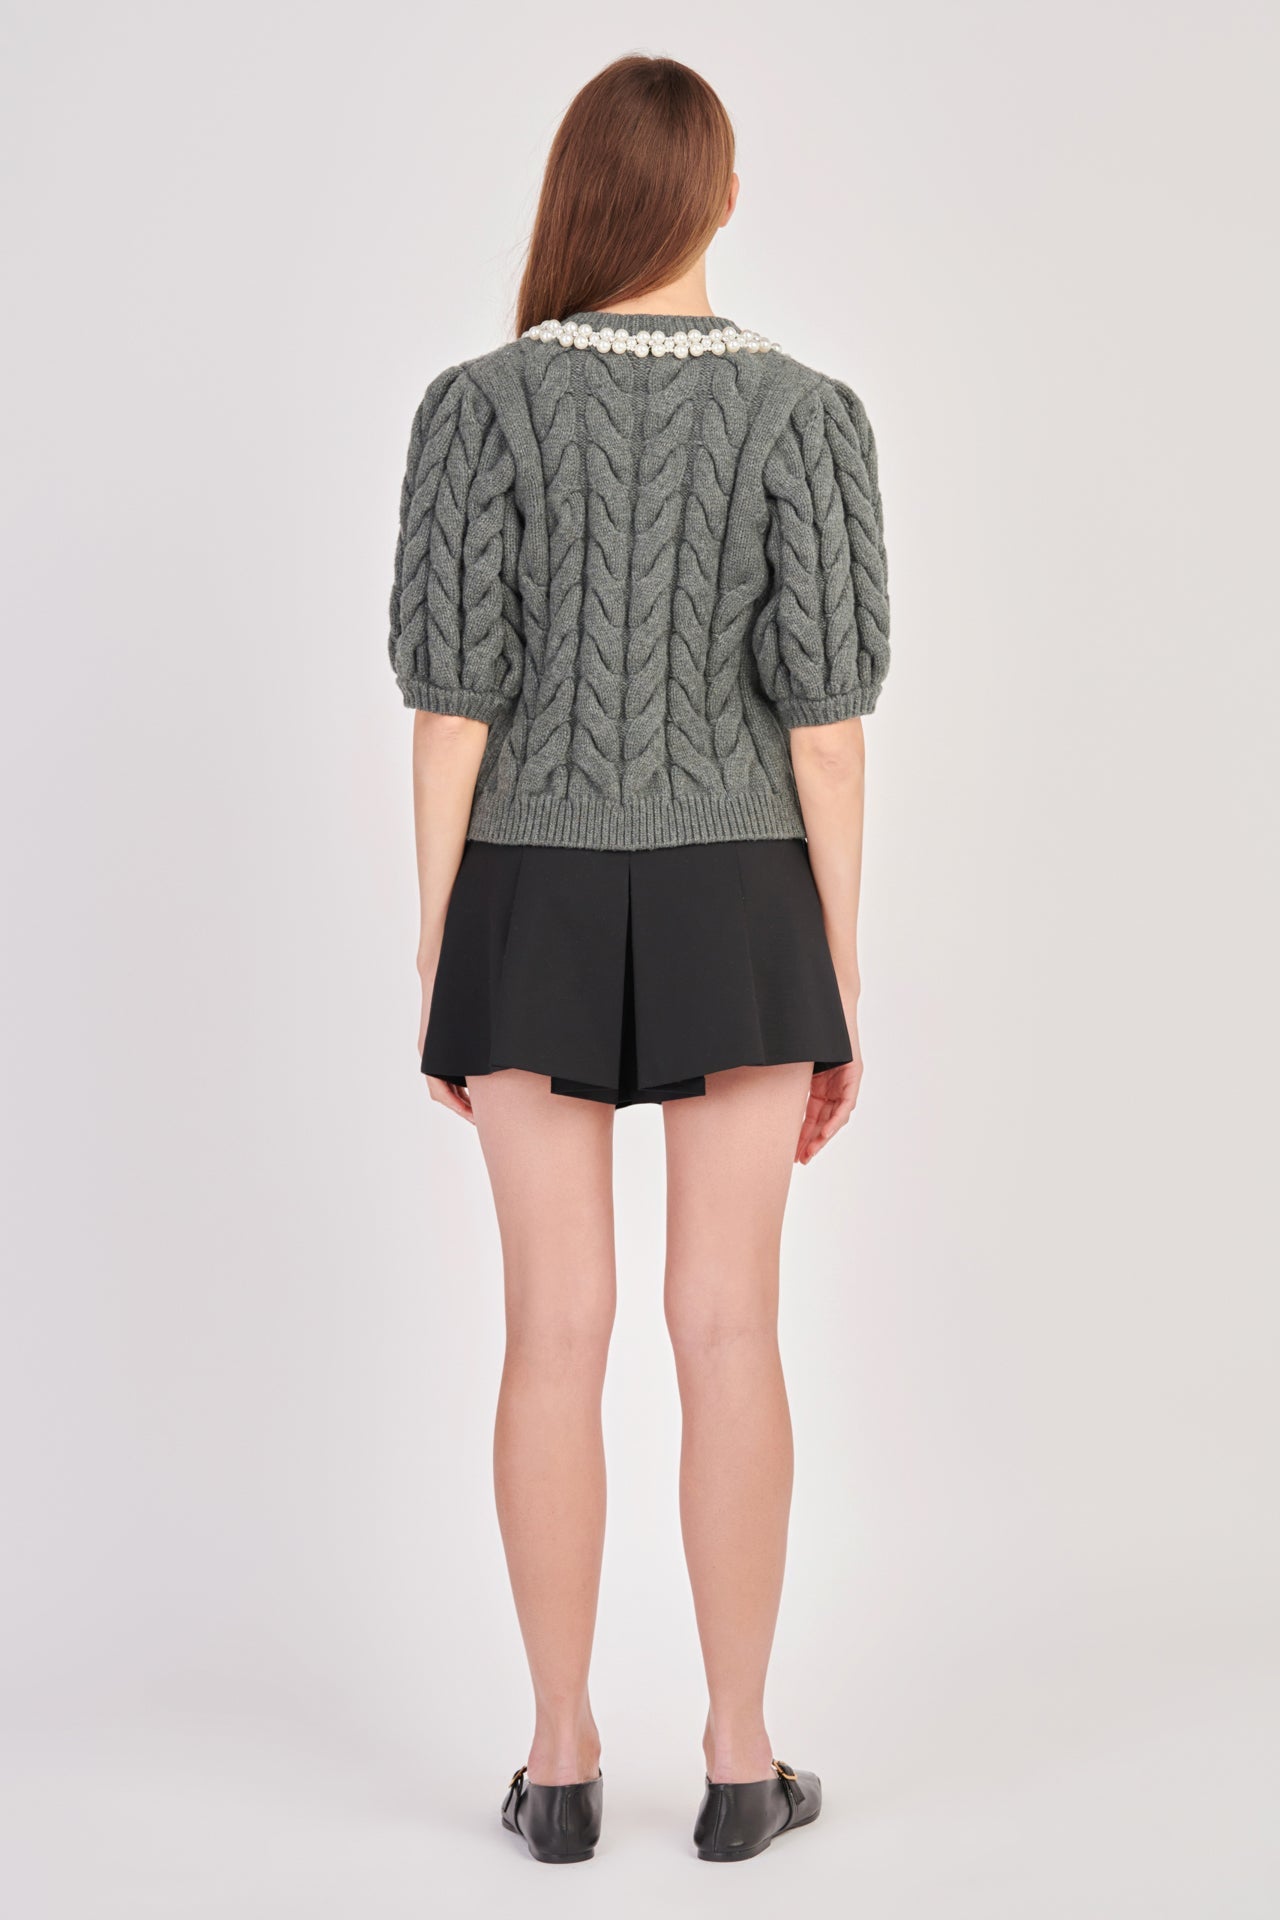 ENDLESS ROSE - Pearl Trim Cable Knit Top - TOPS available at Objectrare